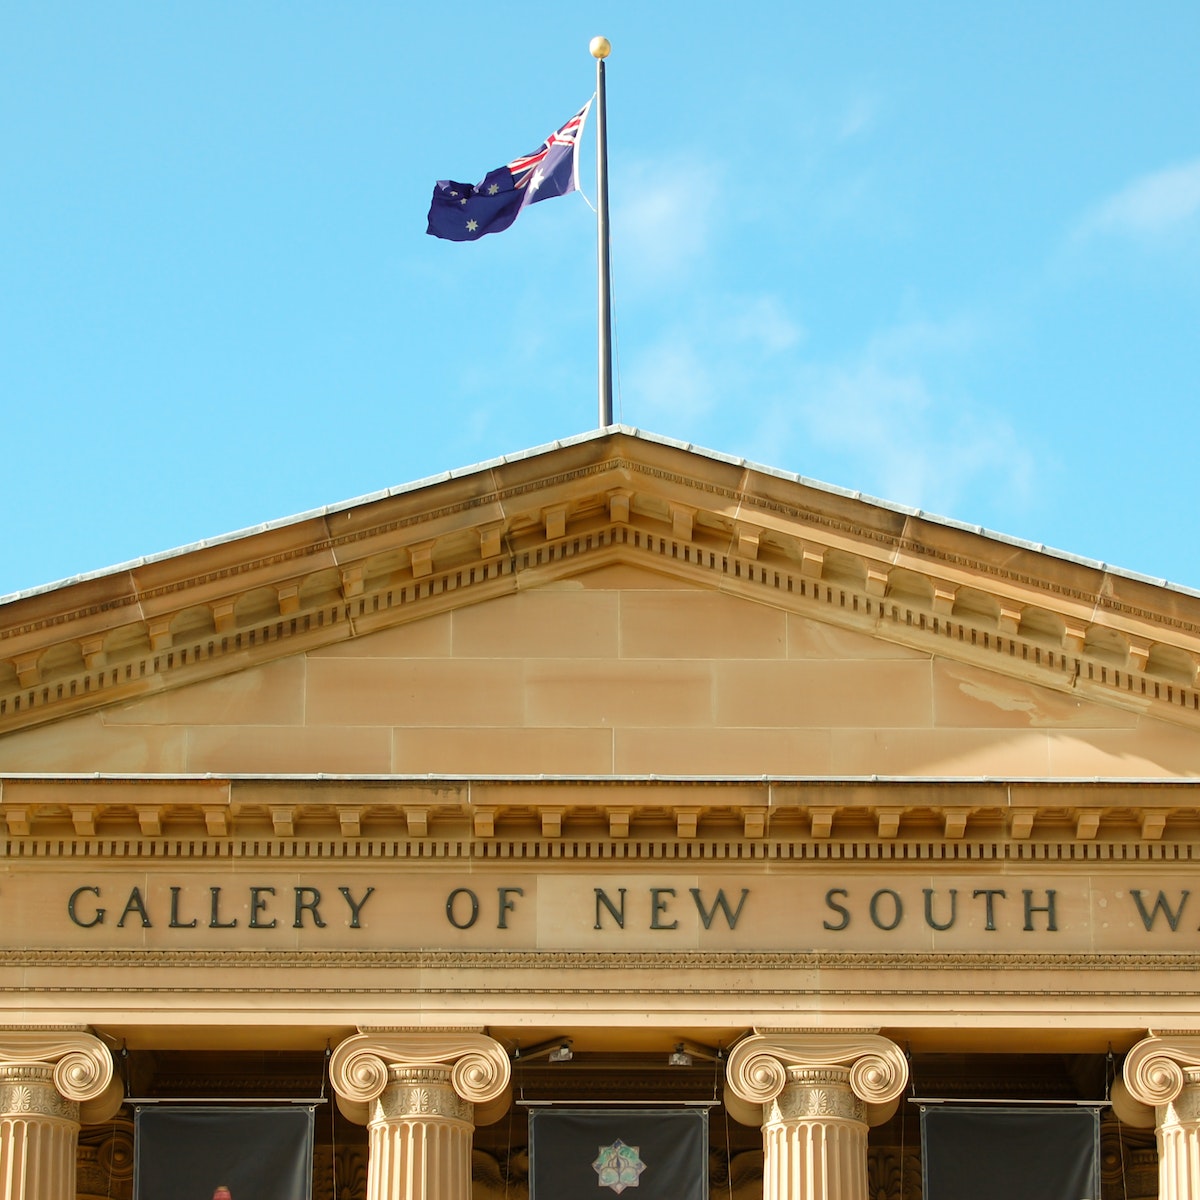 The Art Gallery of New South Wales is located in The Domain in Sydney, New South Wales, Australia. It is the most important public gallery in Sydney and the fourth largest in Australia.; Shutterstock ID 106370831; Your name (First / Last): Josh Vogel; Project no. or GL code: 56530; Network activity no. or Cost Centre: Online-Design; Product or Project: 65050/7529/Josh Vogel/LP.com Destination Galleries